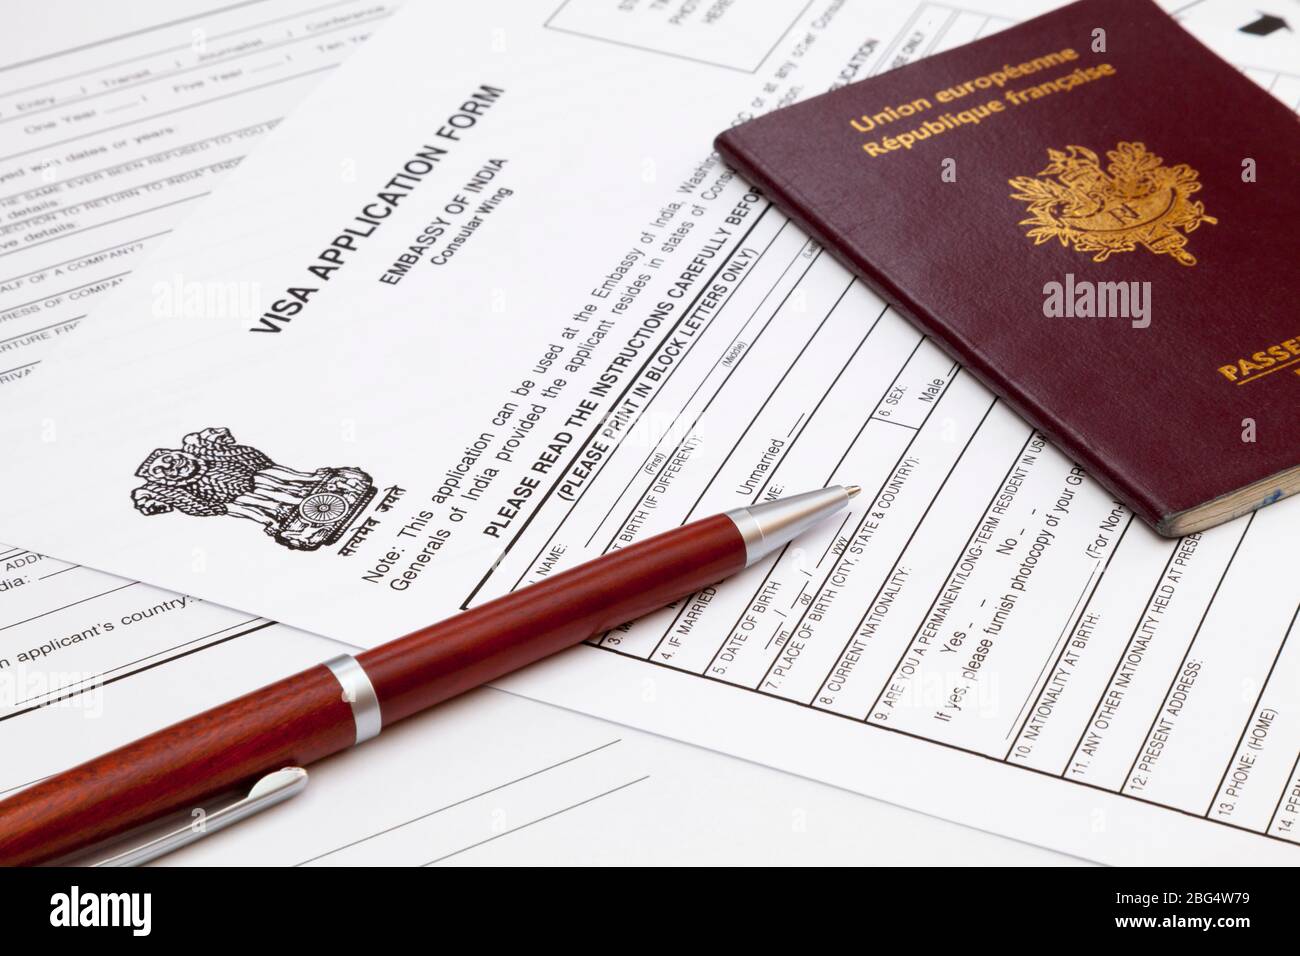 A ballpoint pen and a French passport on the top of an Indian visa application form. Stock Photo